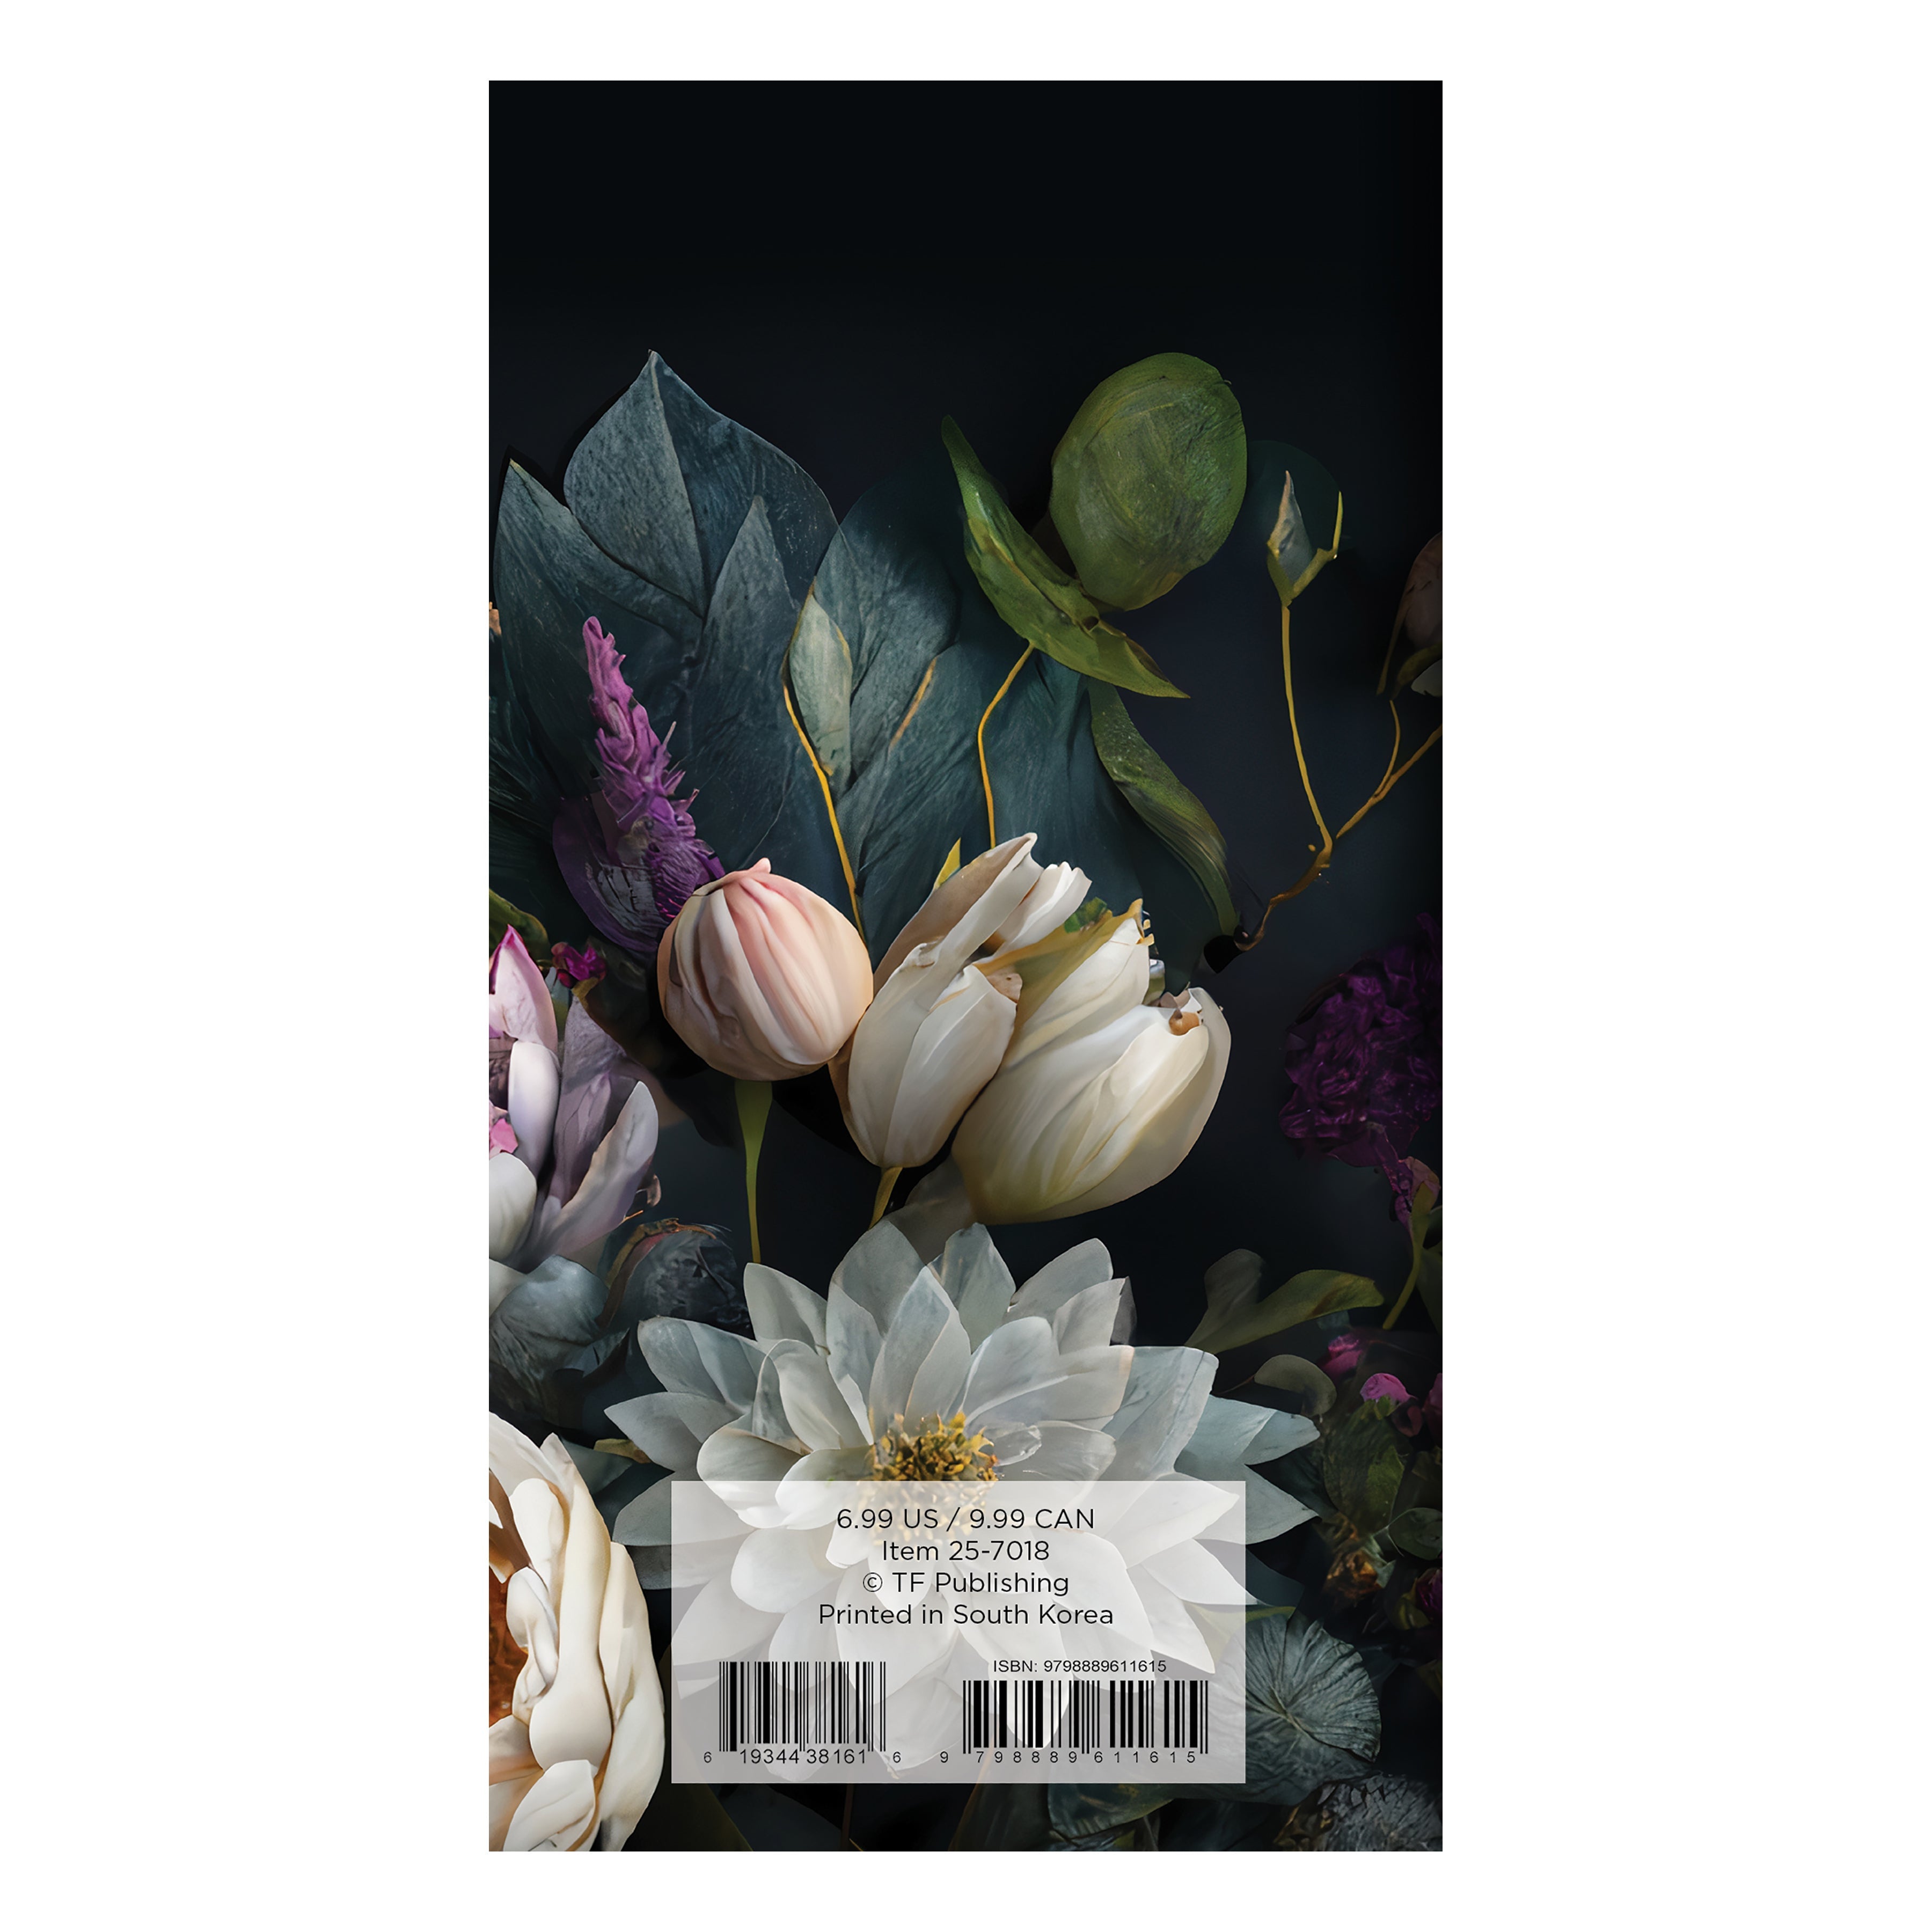 2025-2026 Dutch Flora - Small Monthly Pocket Diary/Planner